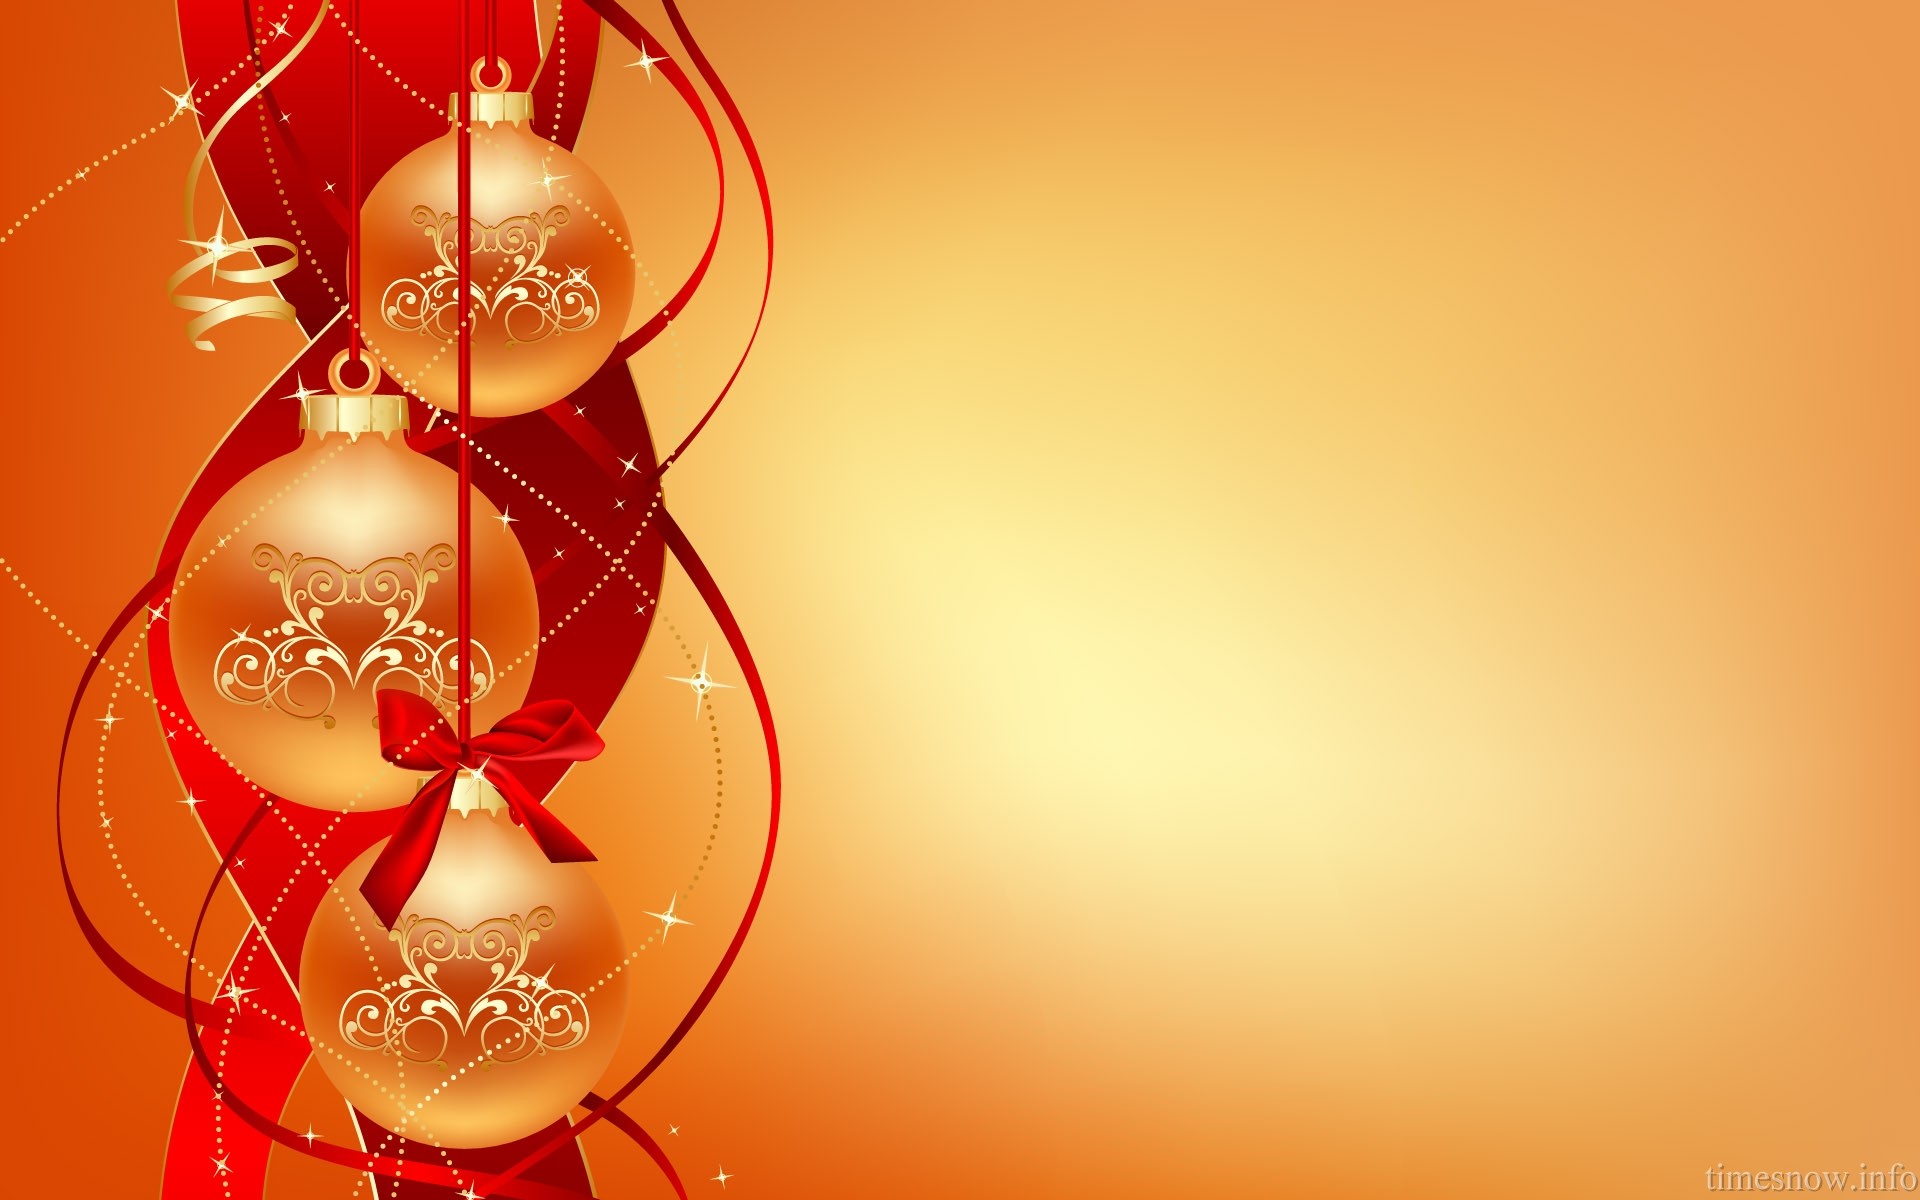 1920x1200 Web Background Balls Gold Holiday Counter Christmas wallpapers HD free .